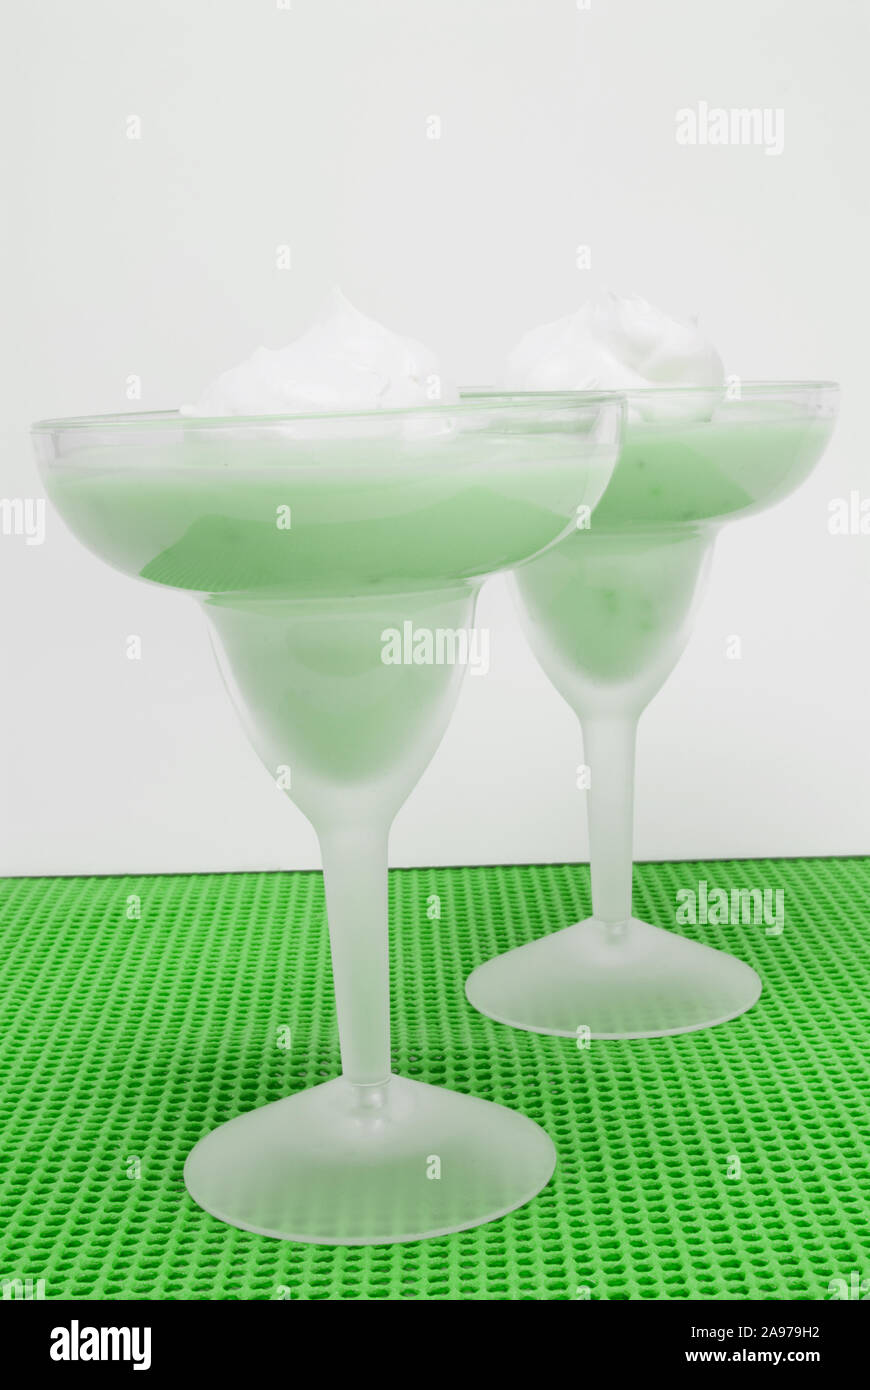 Eye level shot of homemade green colored pistachio pudding with a dollop of whipped cream on top served in two frosted margarita glasses. Naturally li Stock Photo